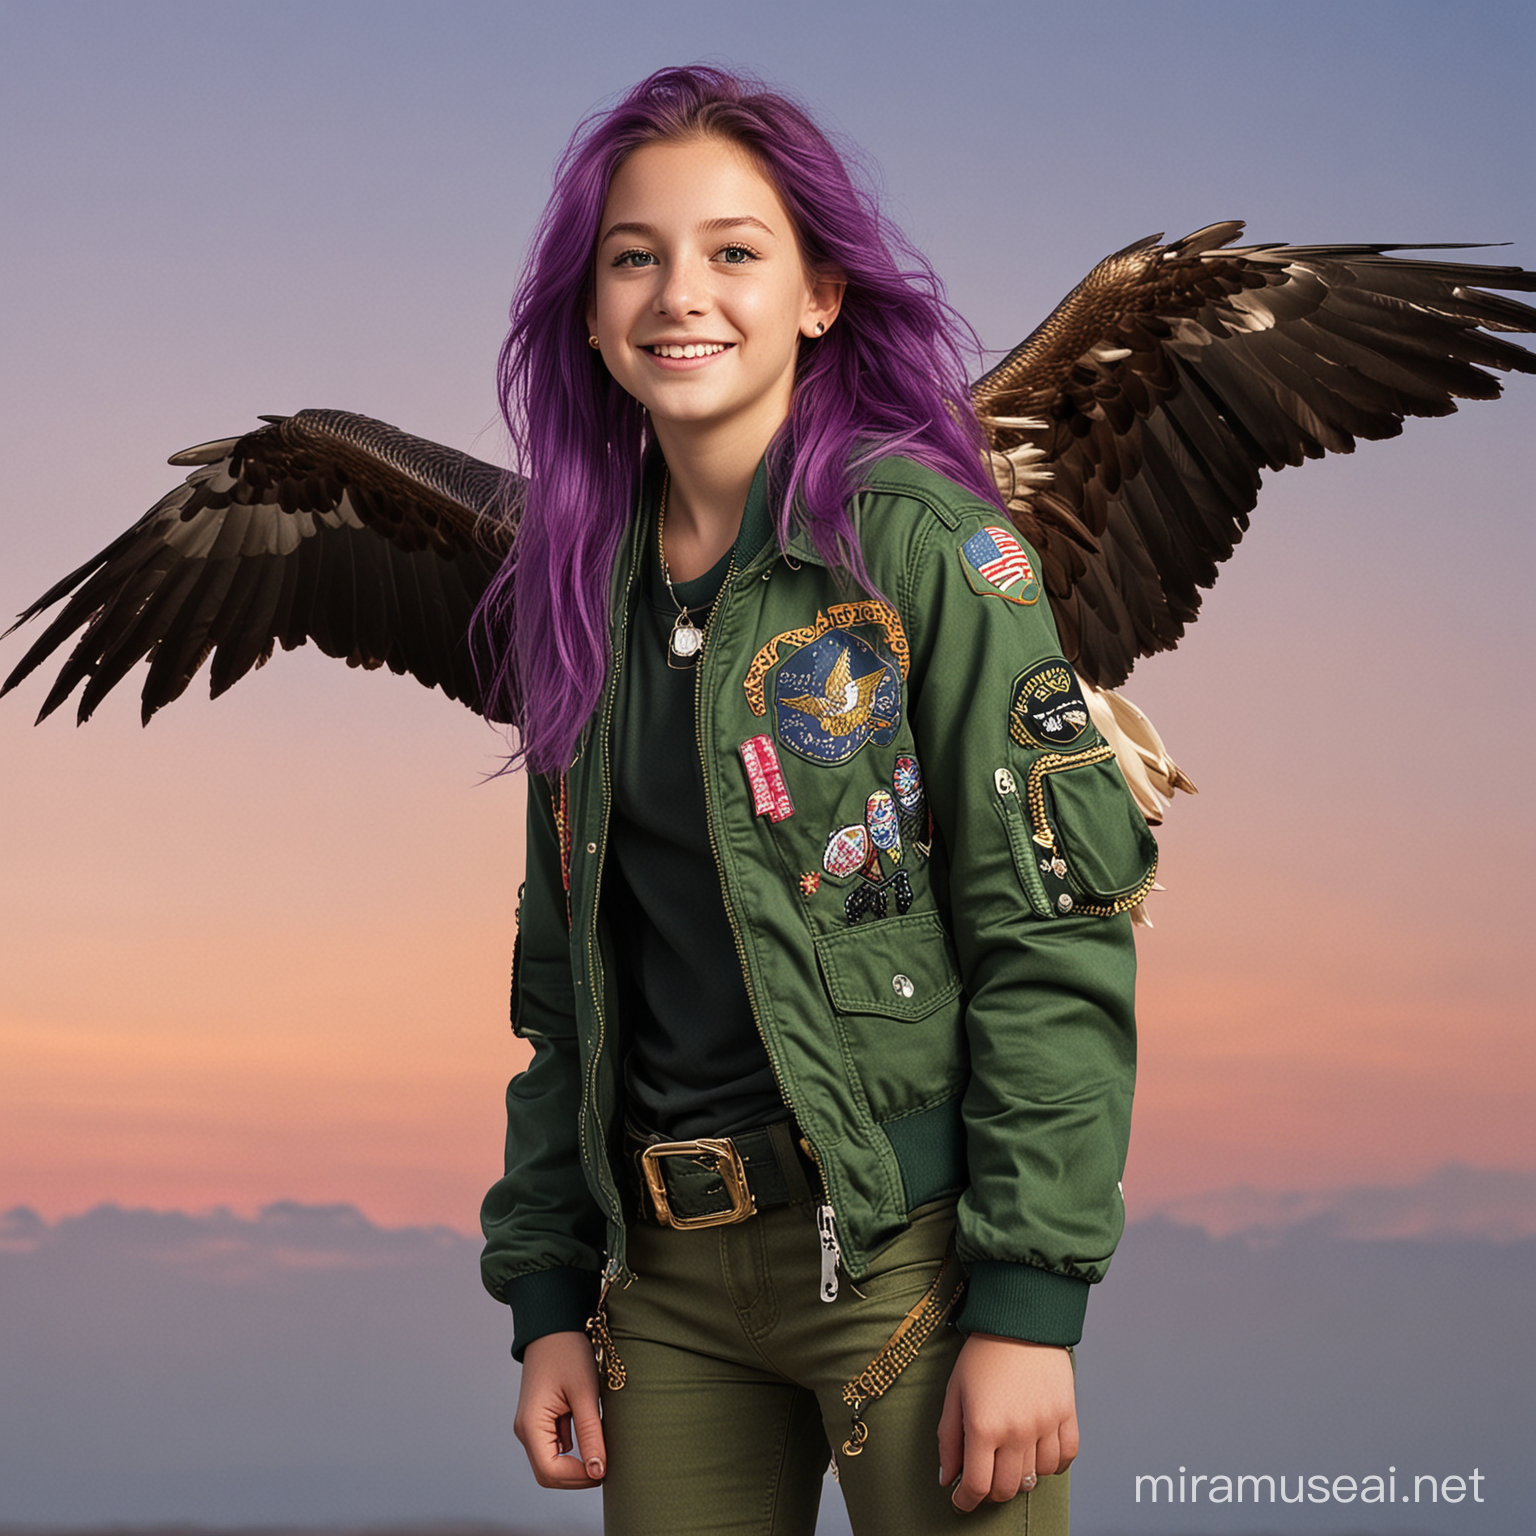 young girl with crooked teeth is flying on the back of a wedgetail eagle. She has long purple hair and is wearing forest green jeans with knee patches and a slightly bright emerald green top. She has Emerald green eyes. She is wearing a merging shade of green jacket with purple elbow packets on the jacket. The jacket has a golden zipper and decorated with gold studs. There is a sunset in the background. Mythical surrealism style
